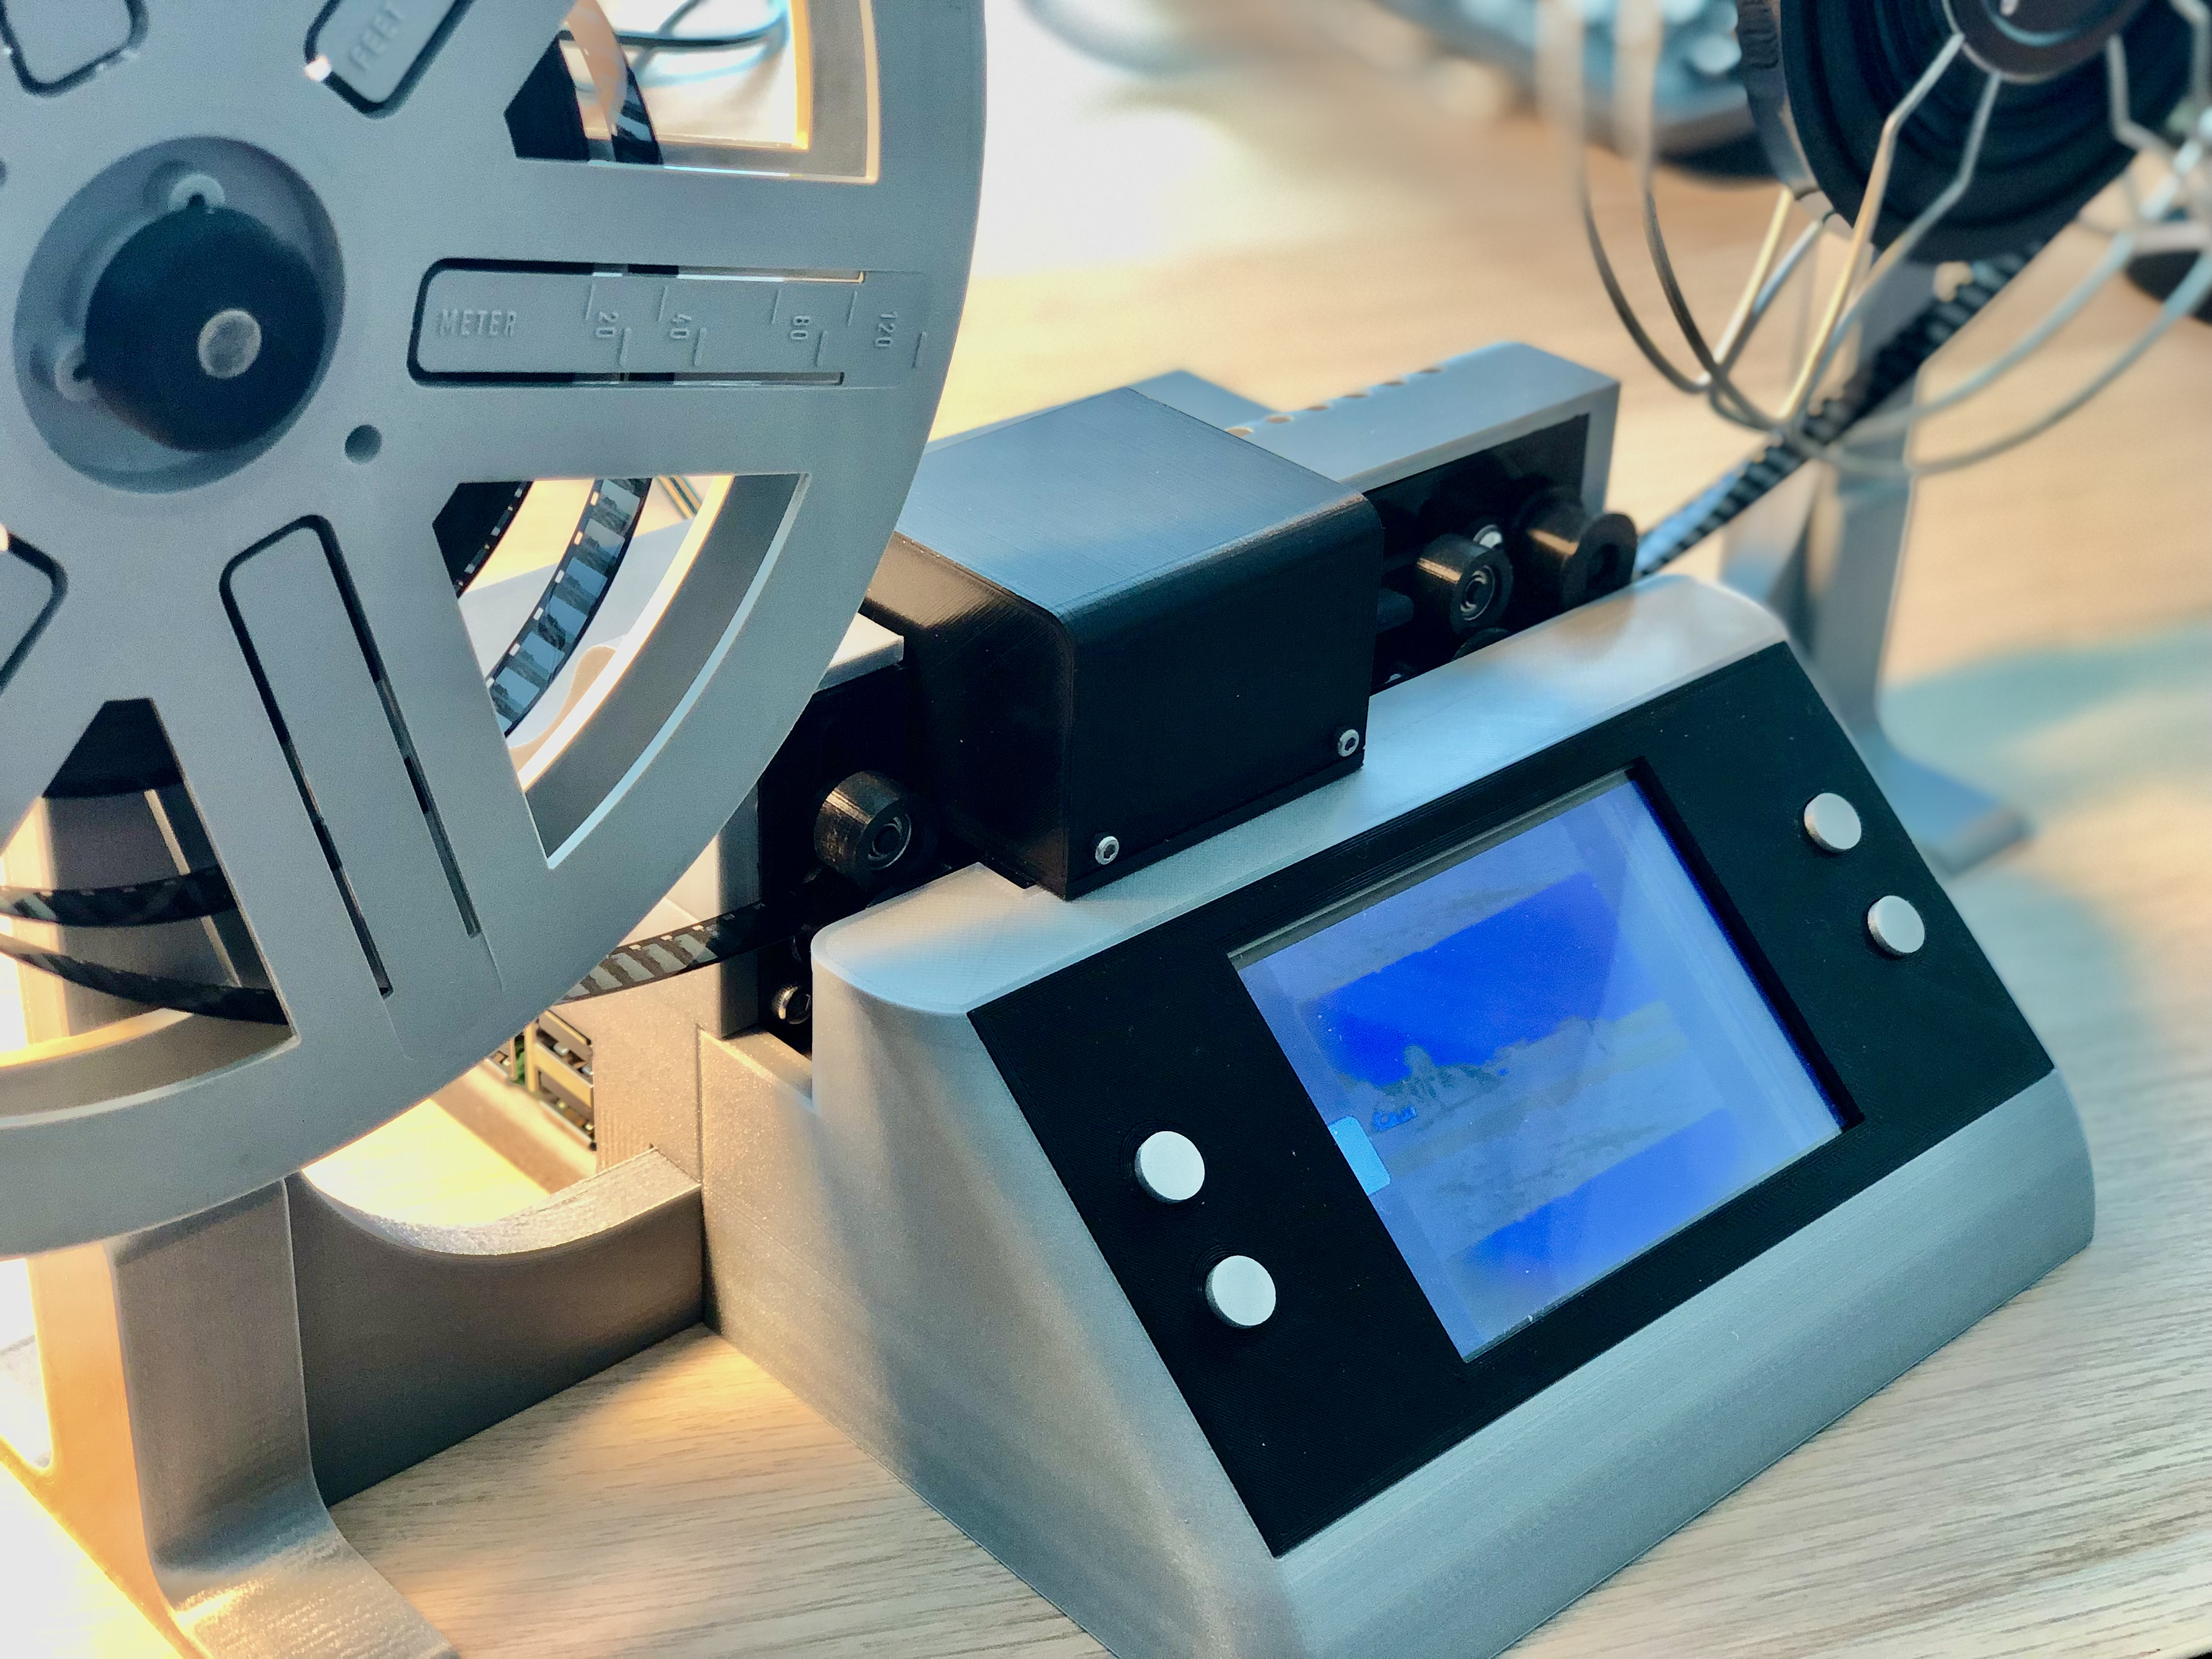 New film plate for 3d printed 8mm film scanner